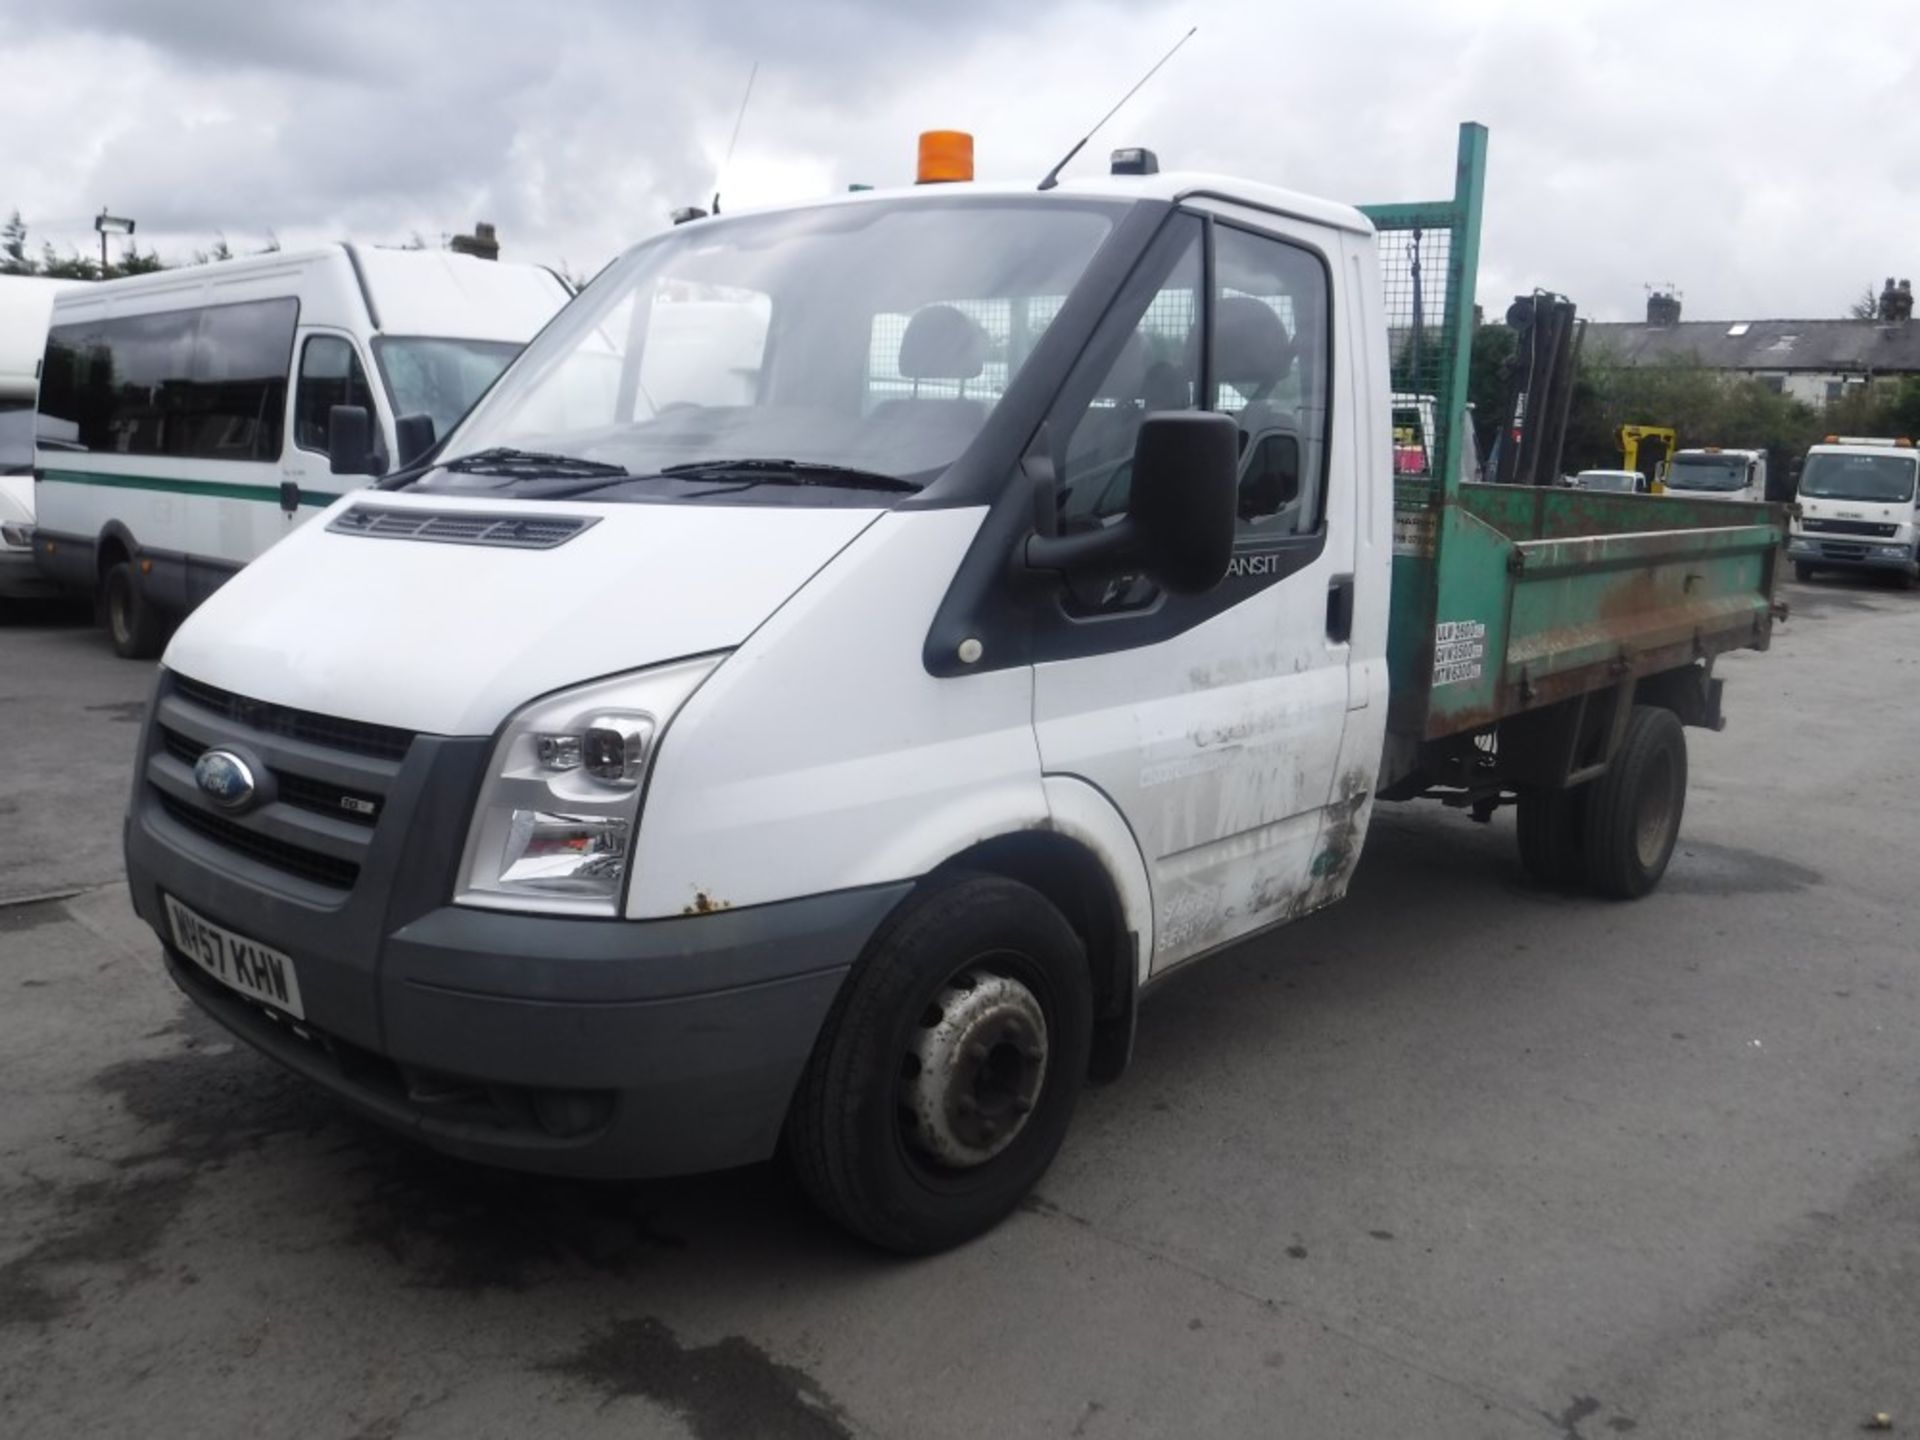 57 reg FORD TRANSIT 115 T350M RWD TIPPER (DIRECT COUNCIL) 1ST REG 11/07, 71227M, V5 HERE, 1 OWNER - Image 2 of 5